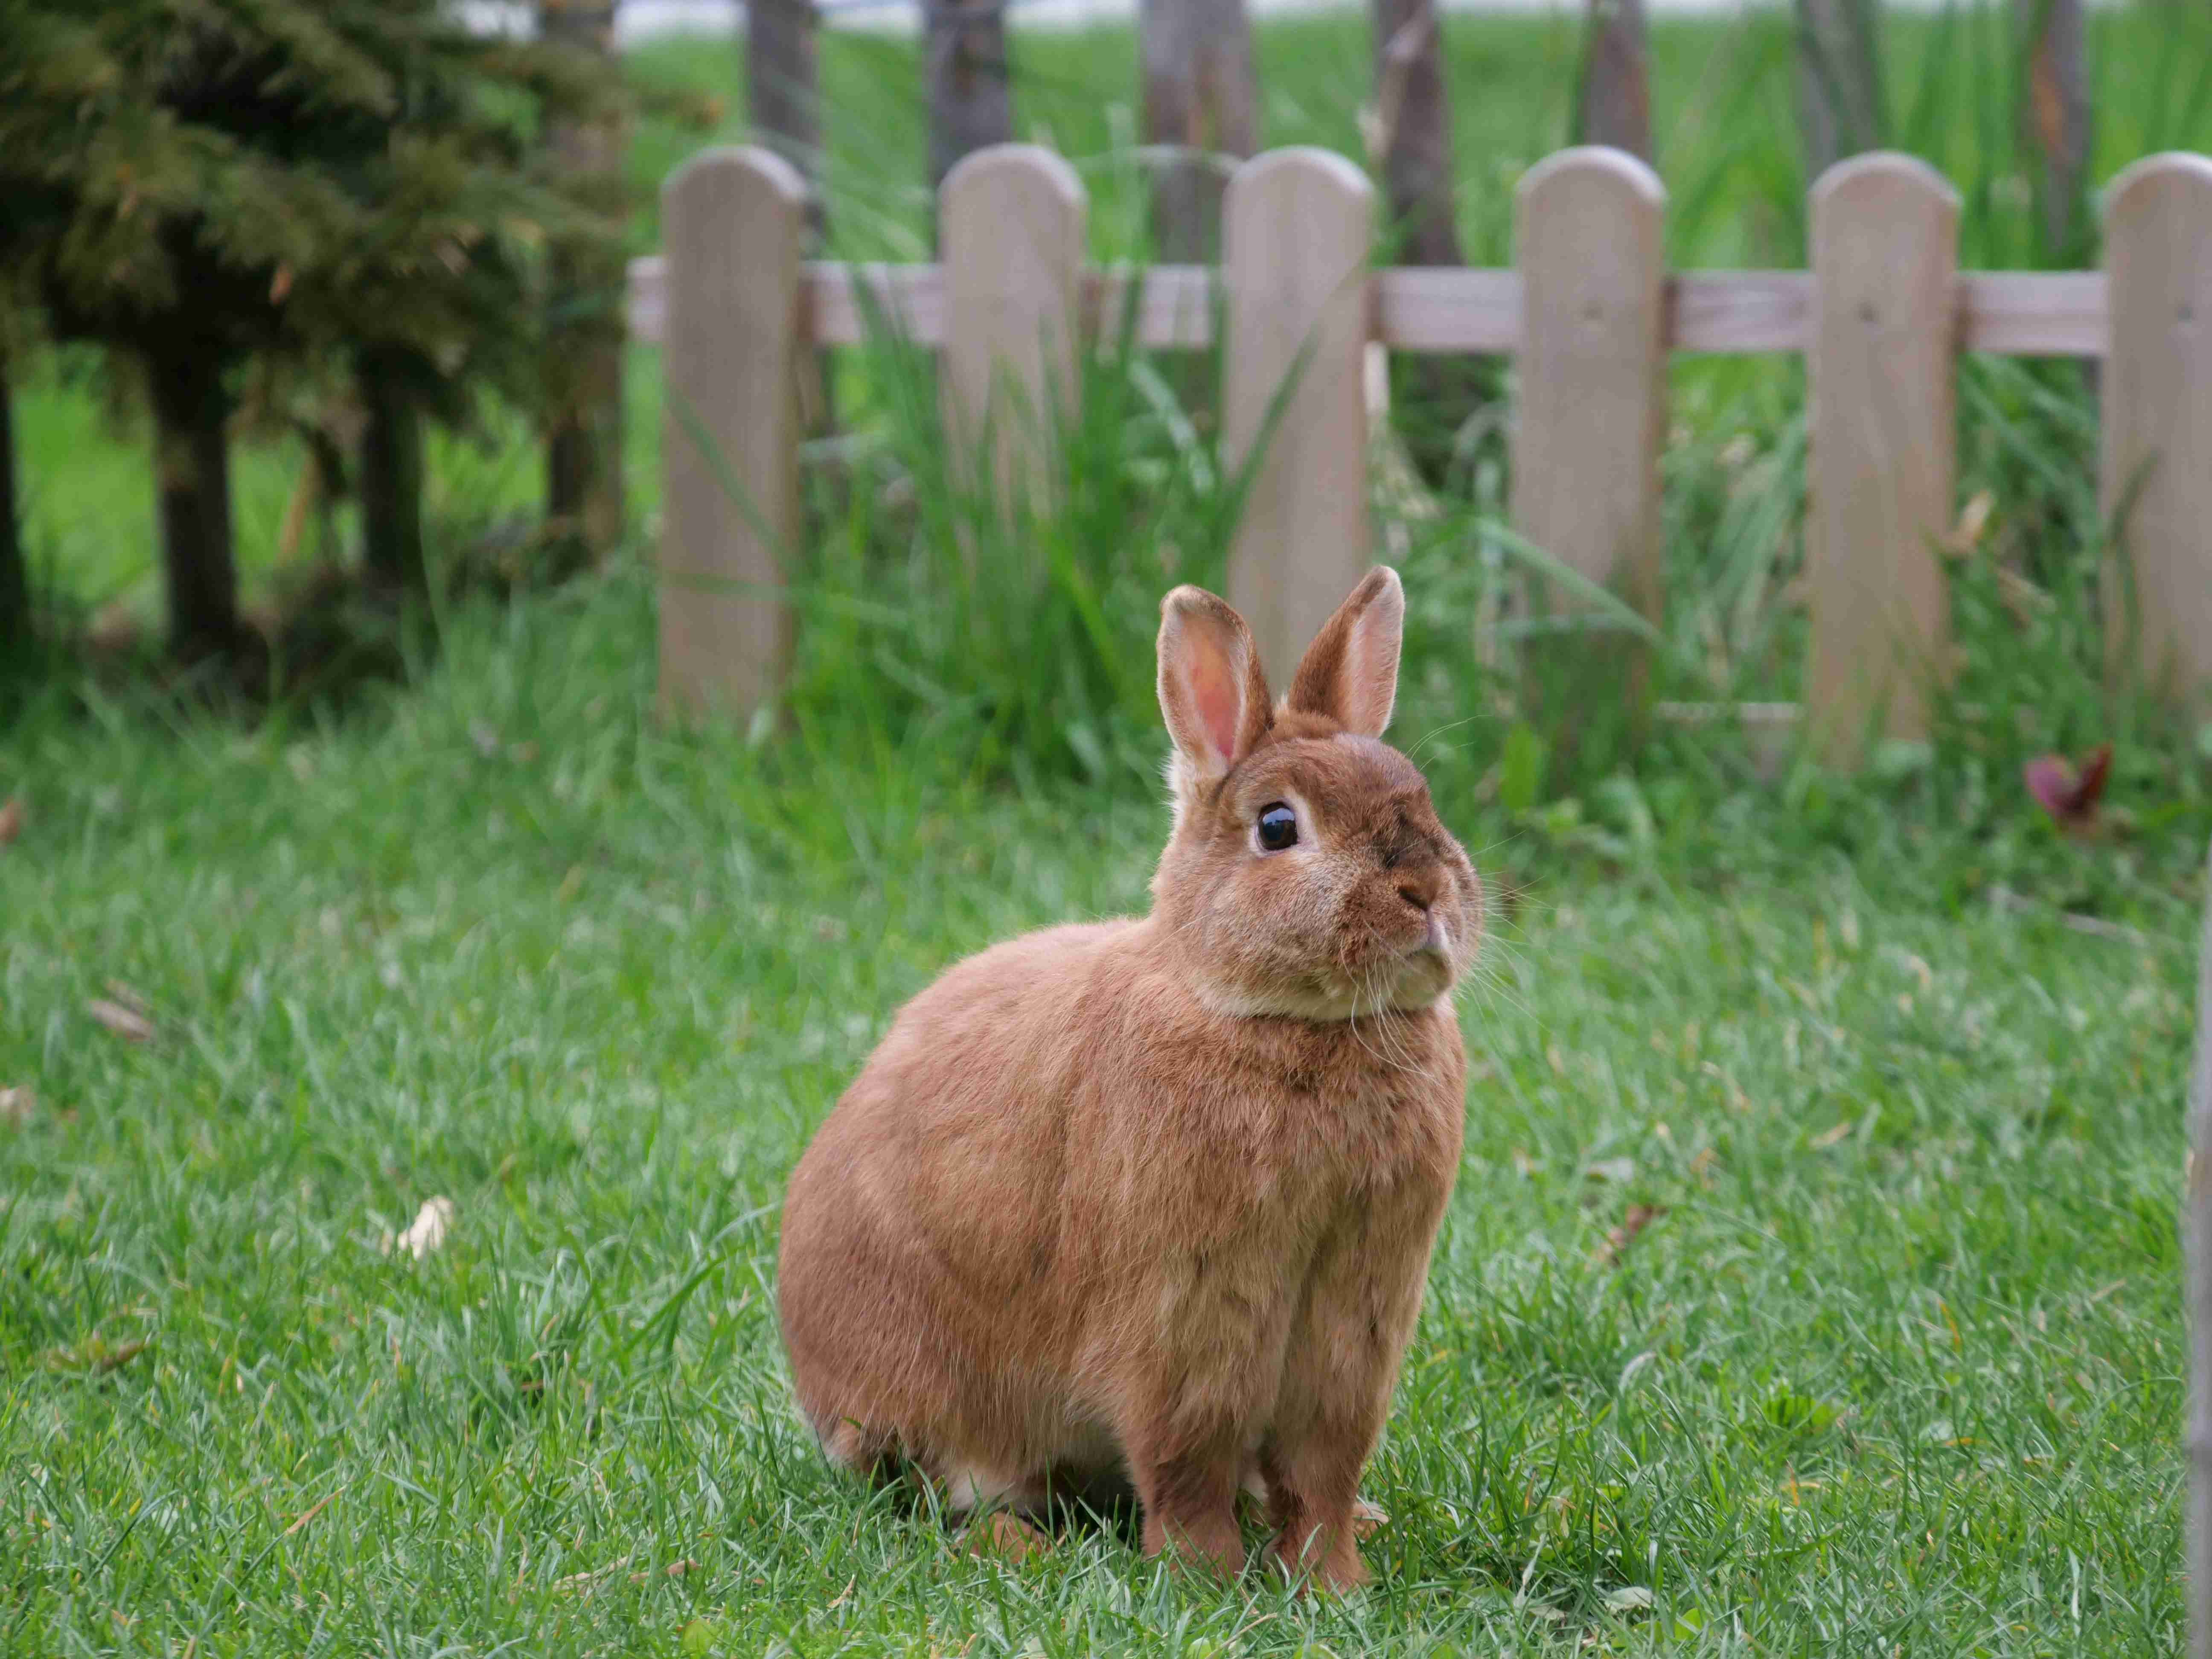 Your Guide to Rabbit Health: How Often Should You Take Your Pet Rabbit to the Vet?